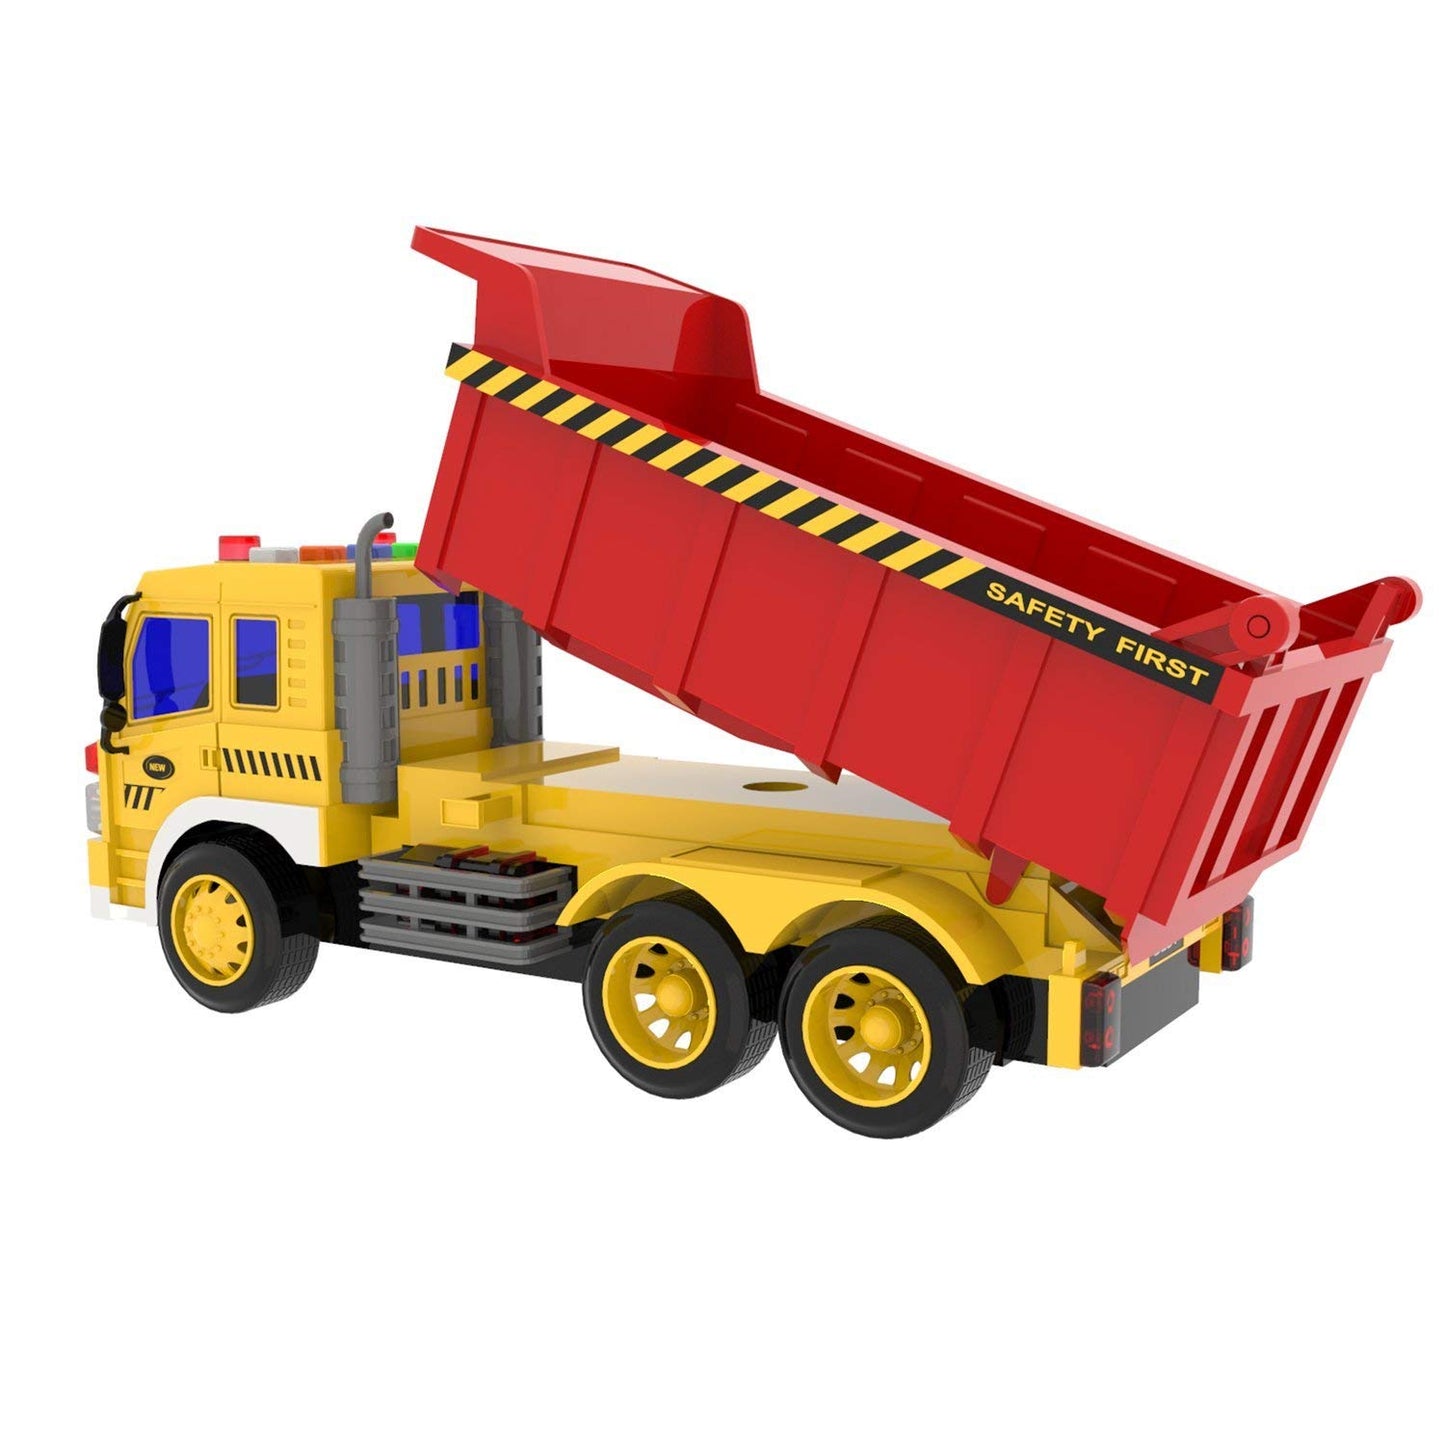 Dump Truck Toy Friction Powered Construction Toy Trucks with Sounds and Lights for Kids Gifts（ Batteries Included ）